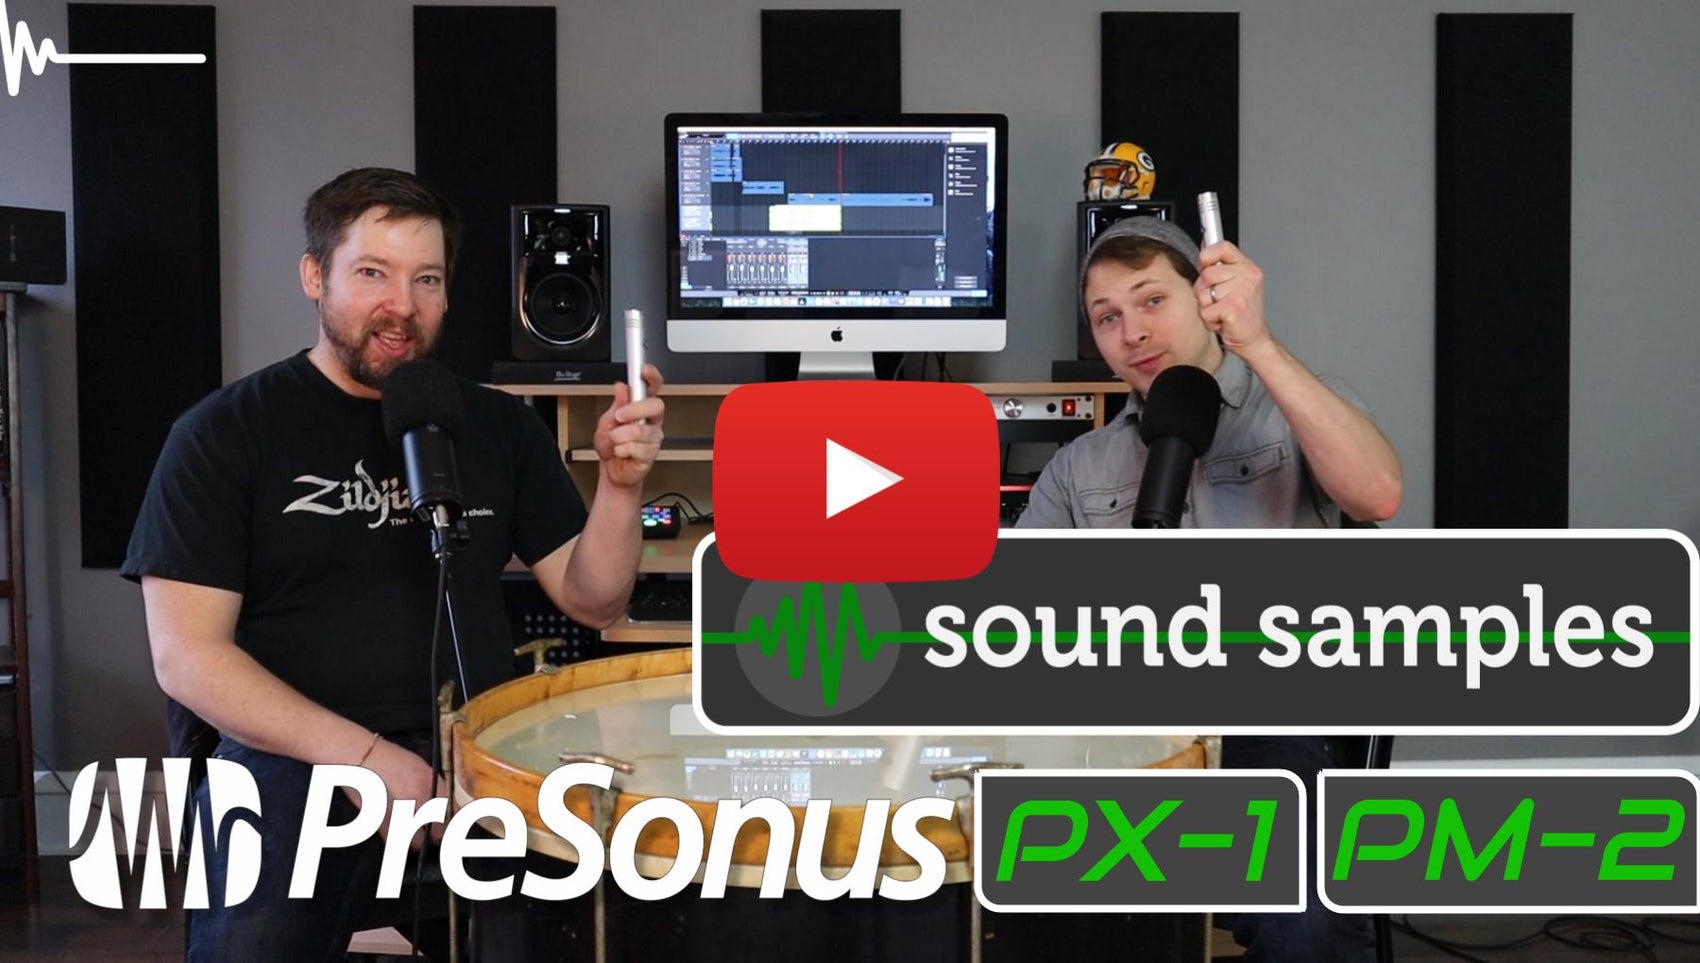 Weekly Show - PPA Unfiltered - PreSonus PX-1 and PM-2 Sound Samples!